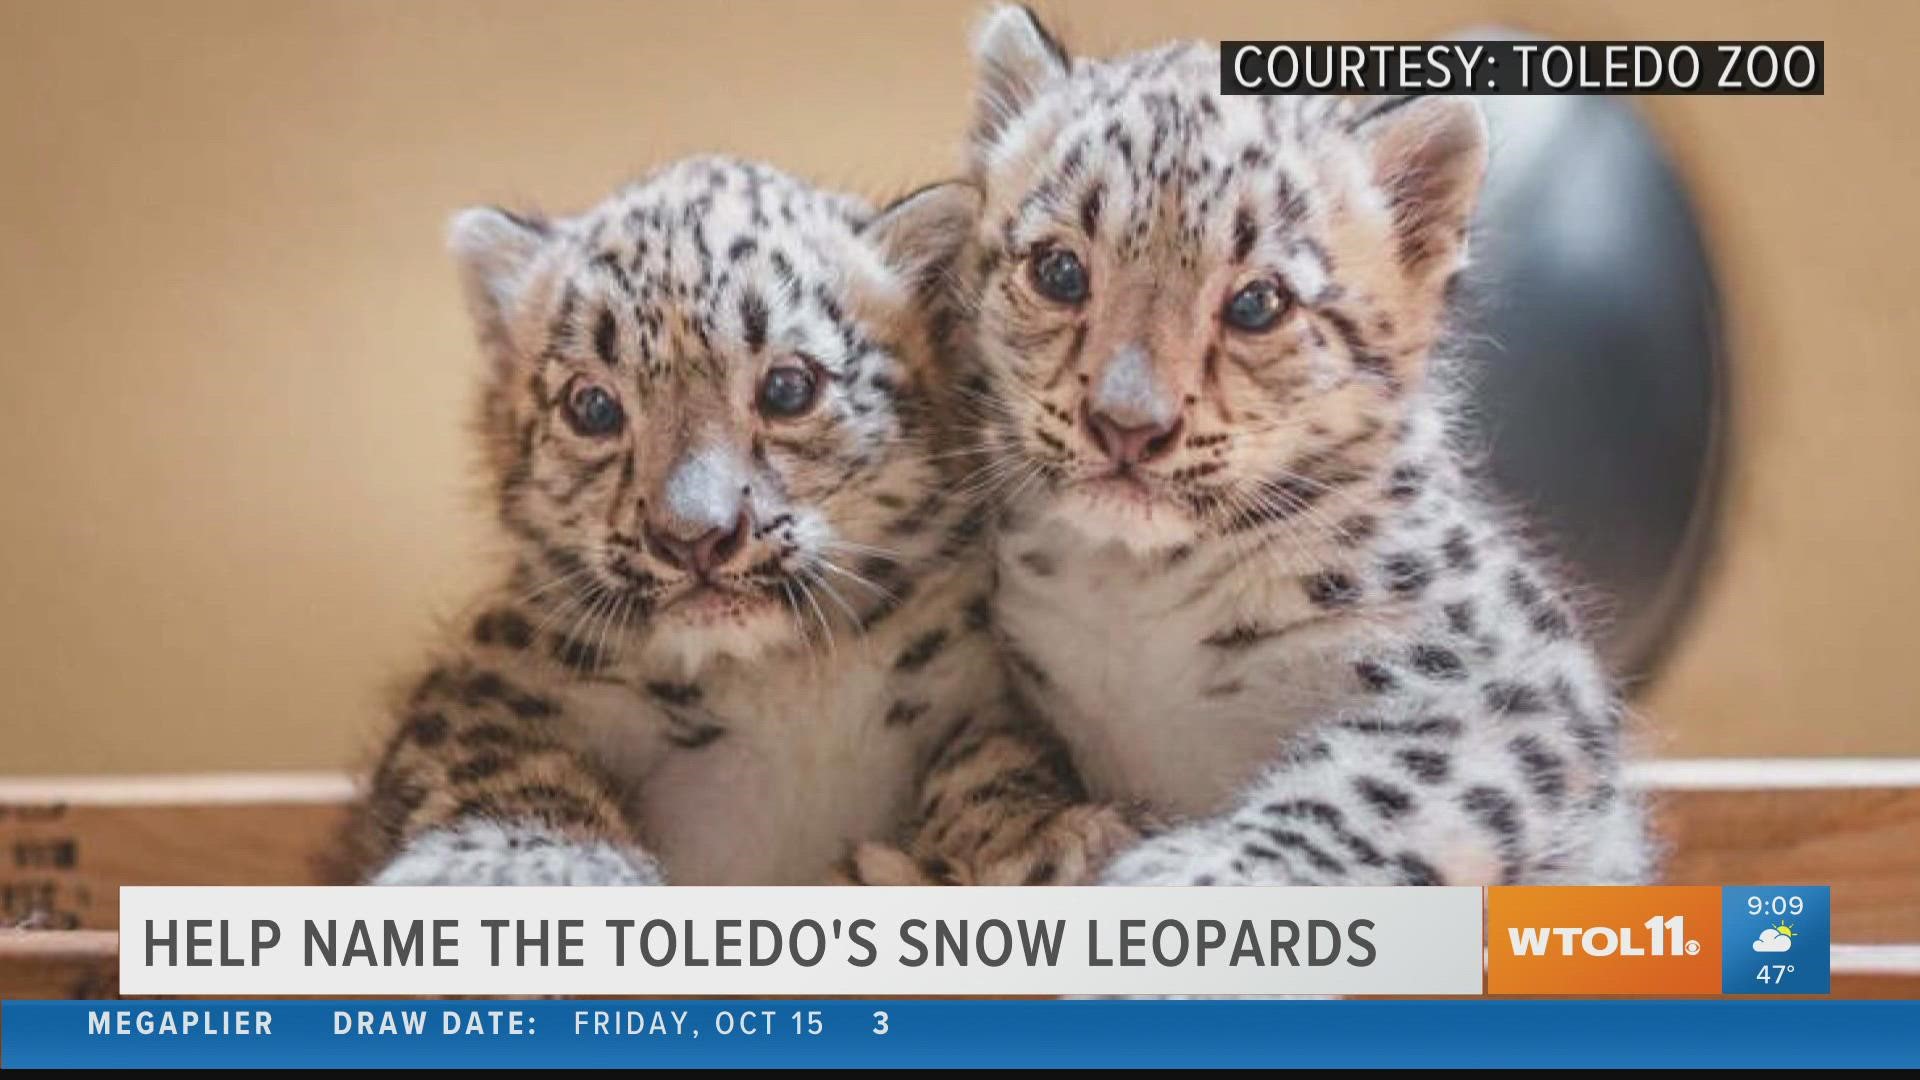 Here's how you can vote to name the two adorable cubs!